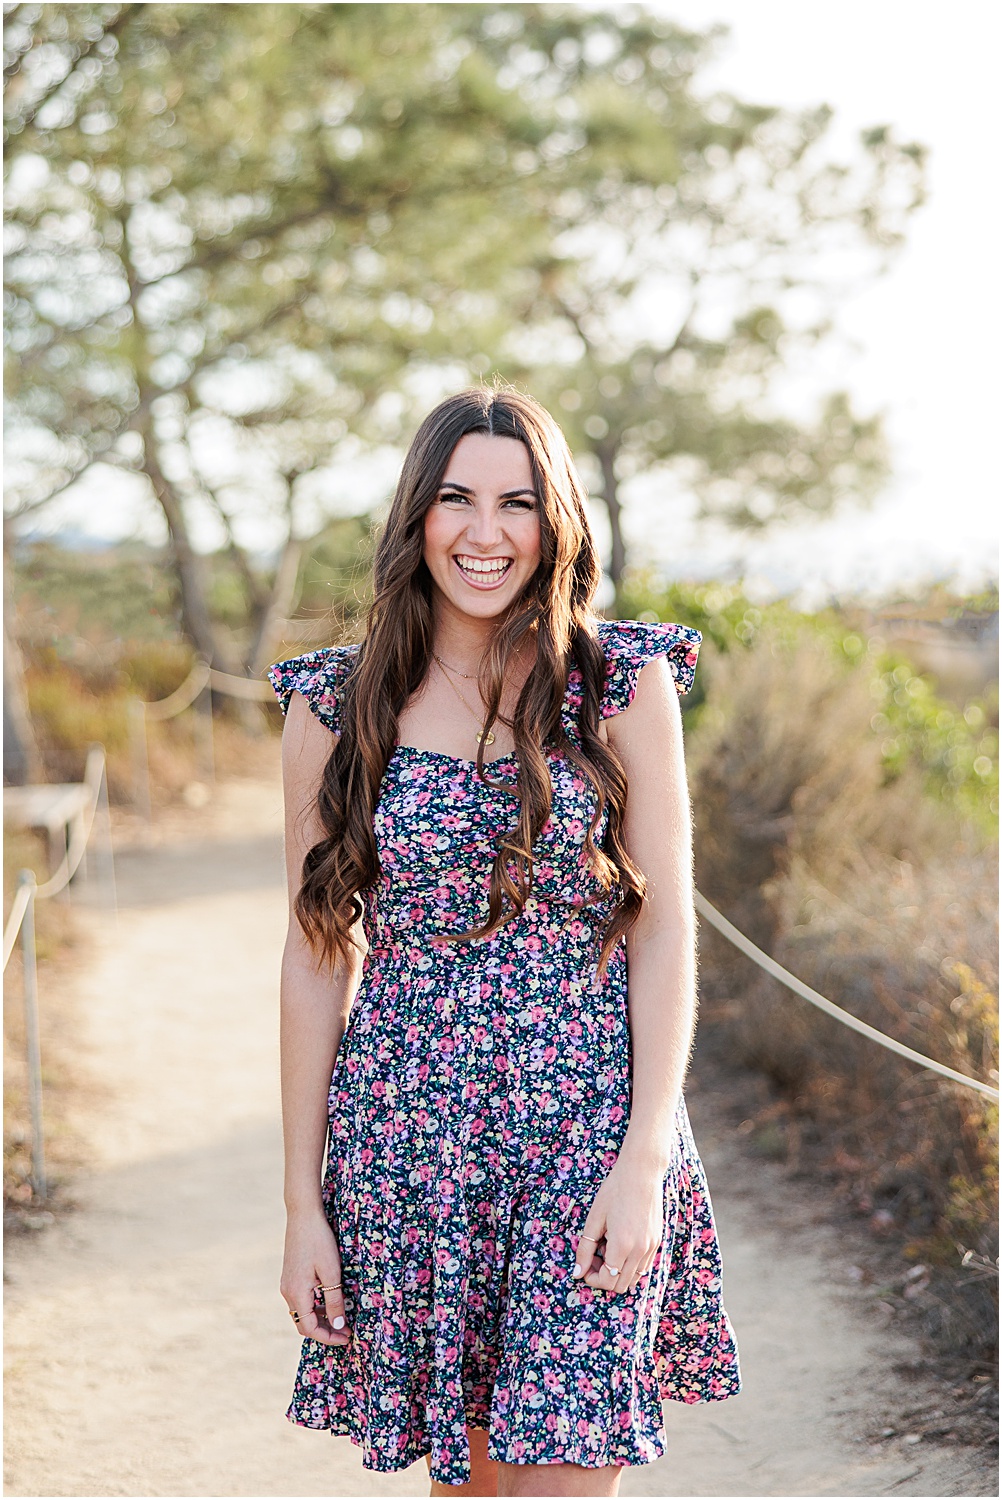 Torrey Pines State Beach Senior Photo Session | High School Senior Girl laughing in floral dress